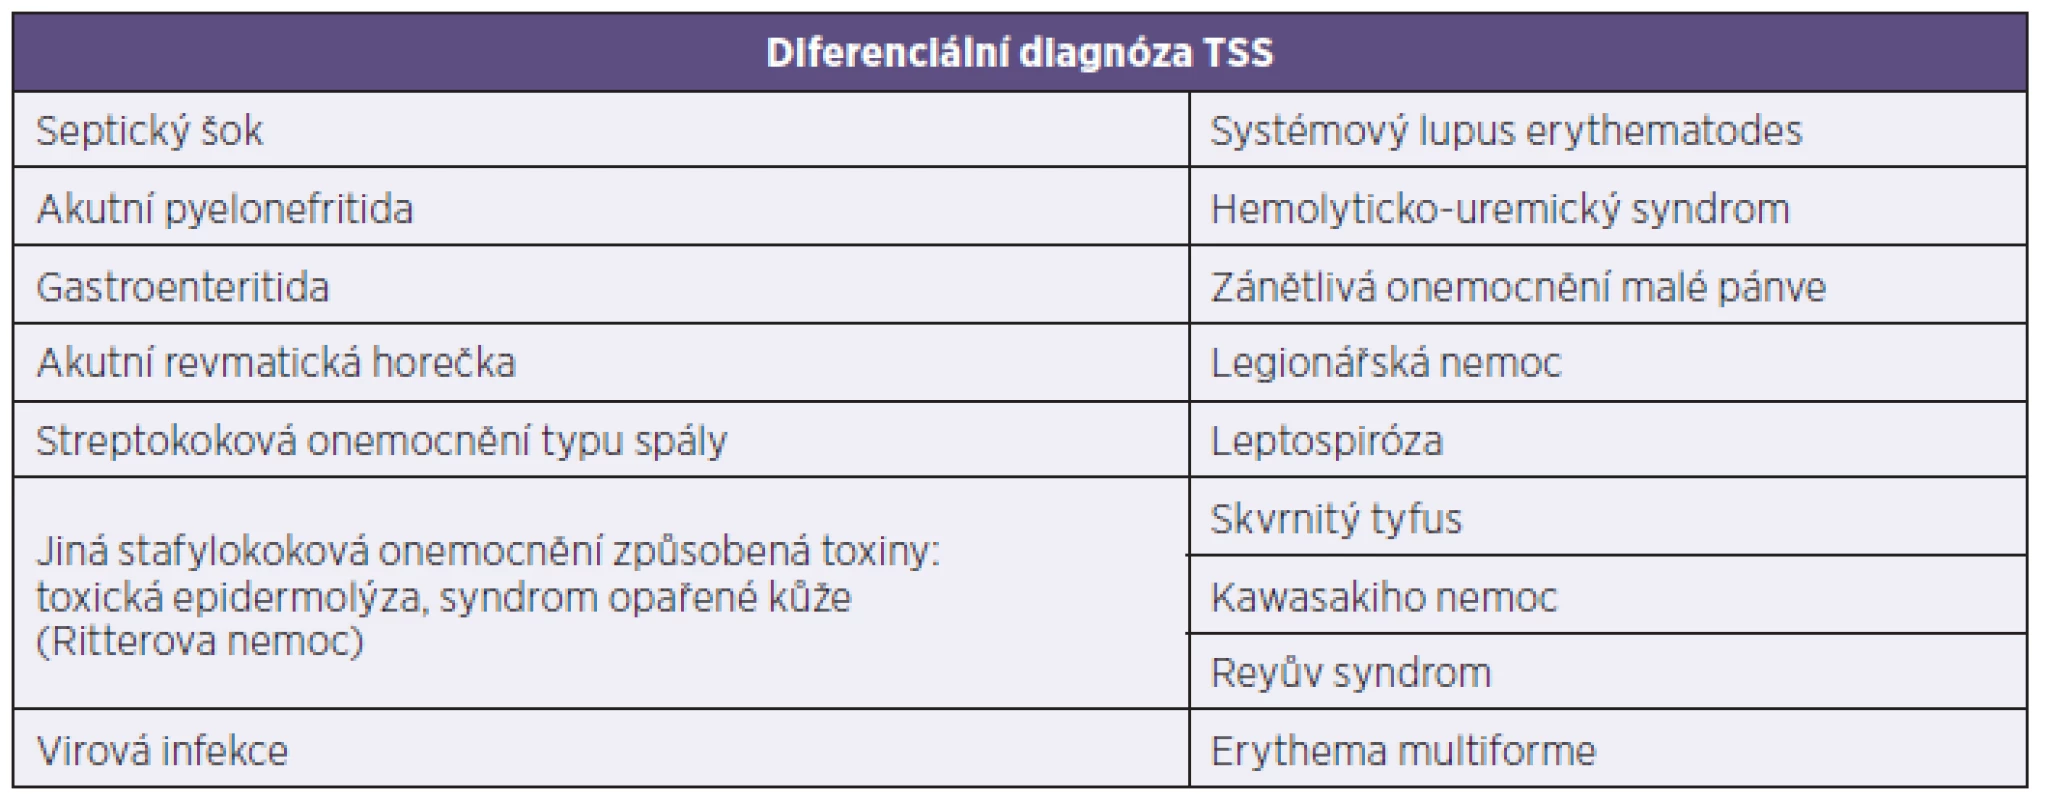 Diferenciální diagnóza TSS
Table 3. Differential diagnosis of toxic shock syndrome